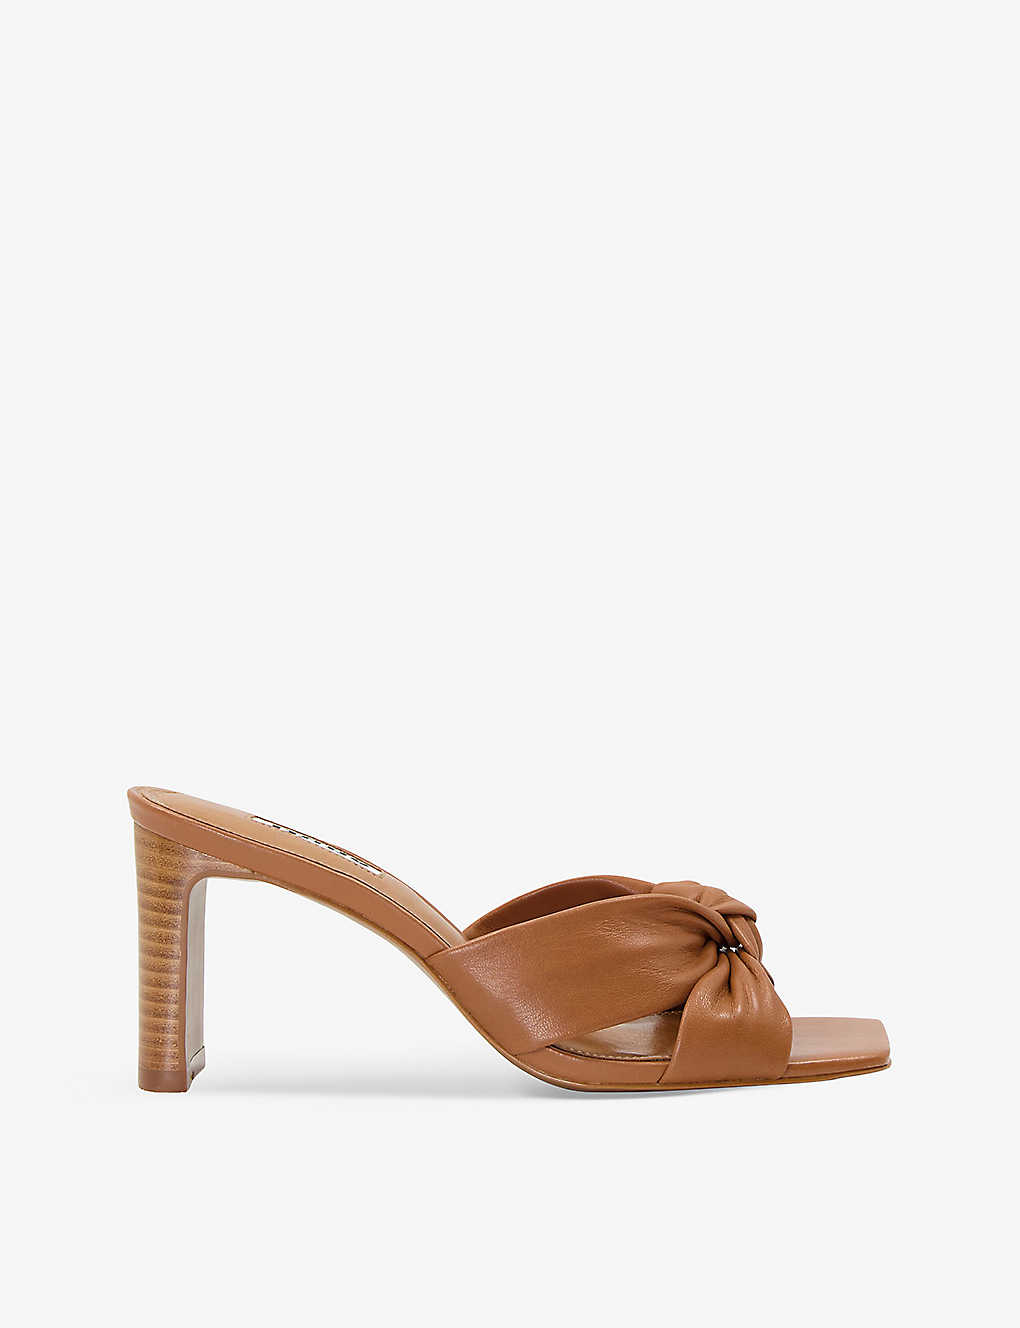 Dune Womens Tan-leather Maize Knot-detail Leather Mules